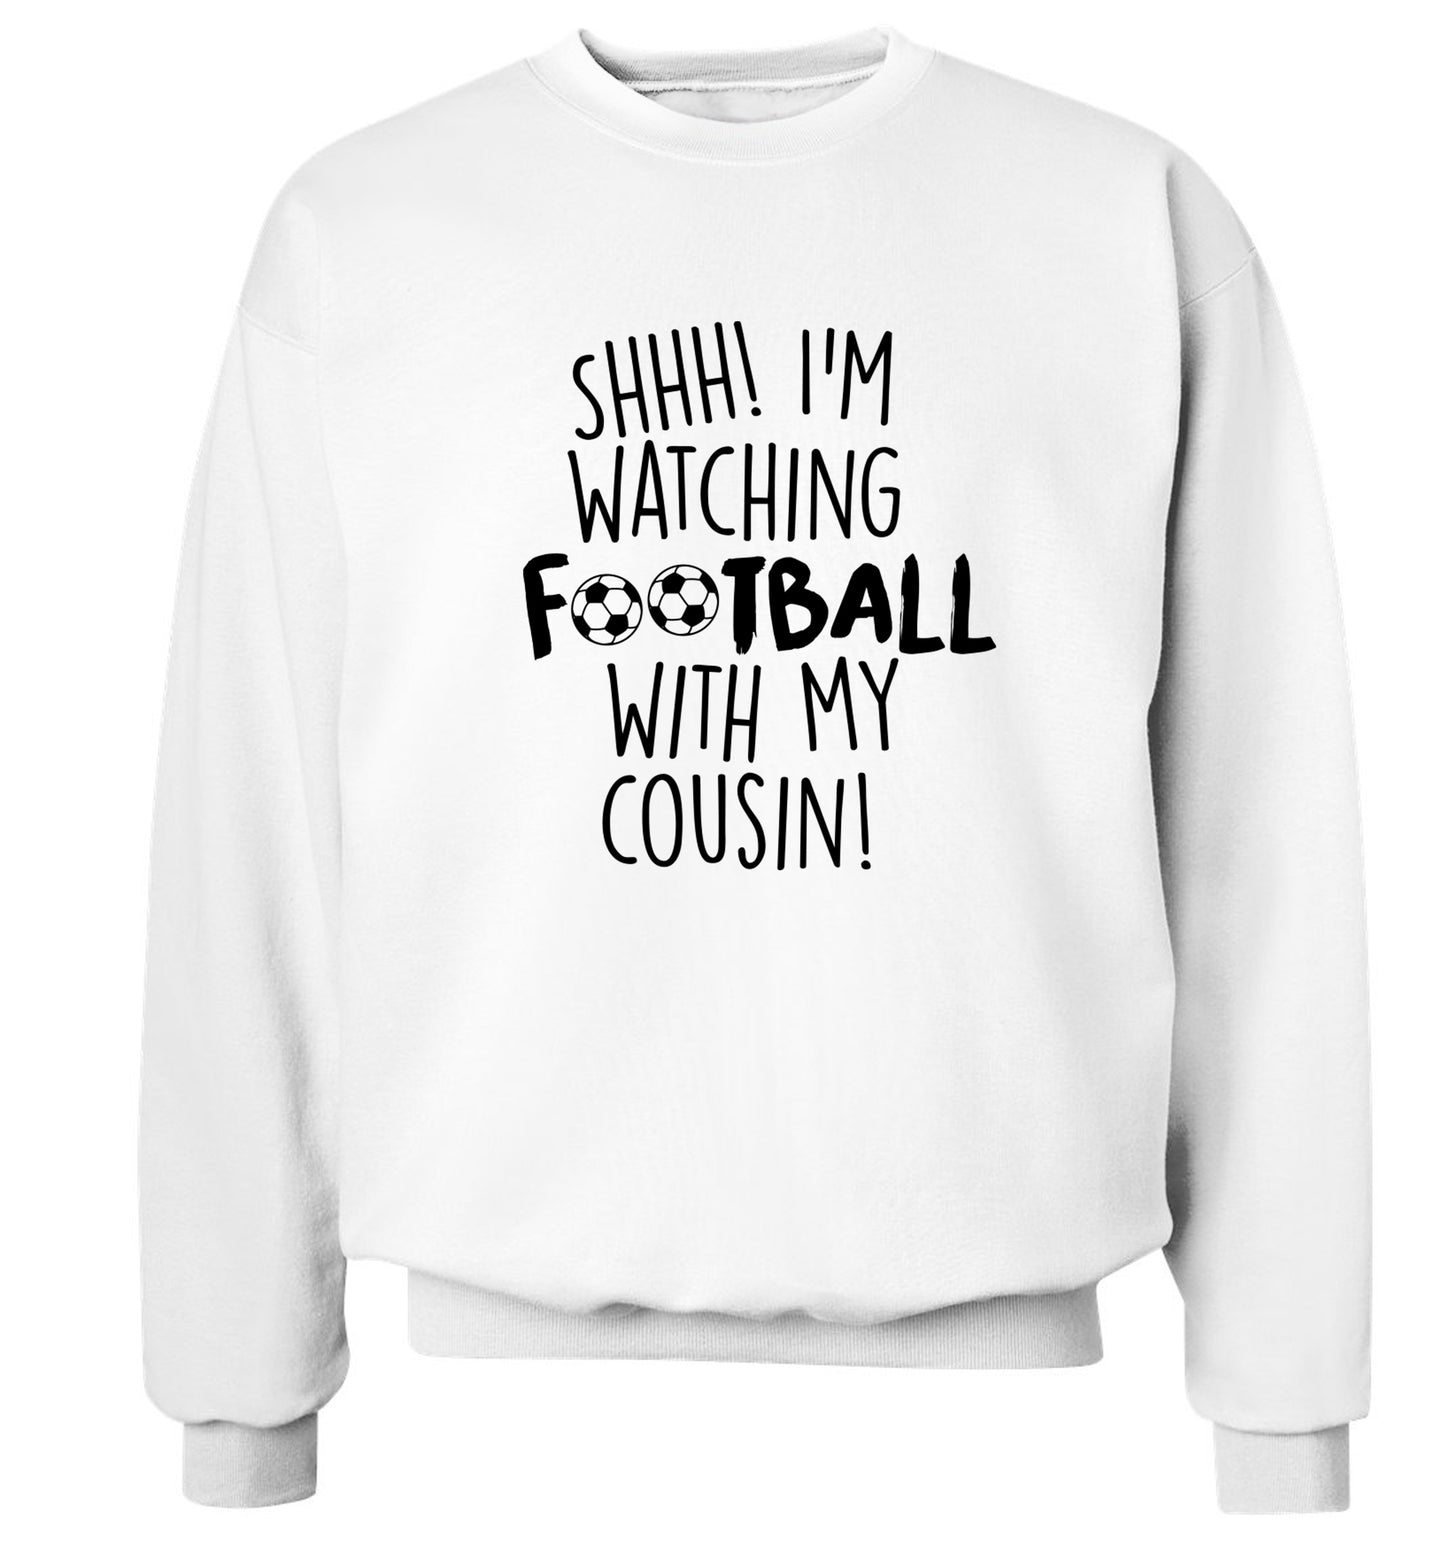 Shhh I'm watching football with my cousin Adult's unisexwhite Sweater 2XL